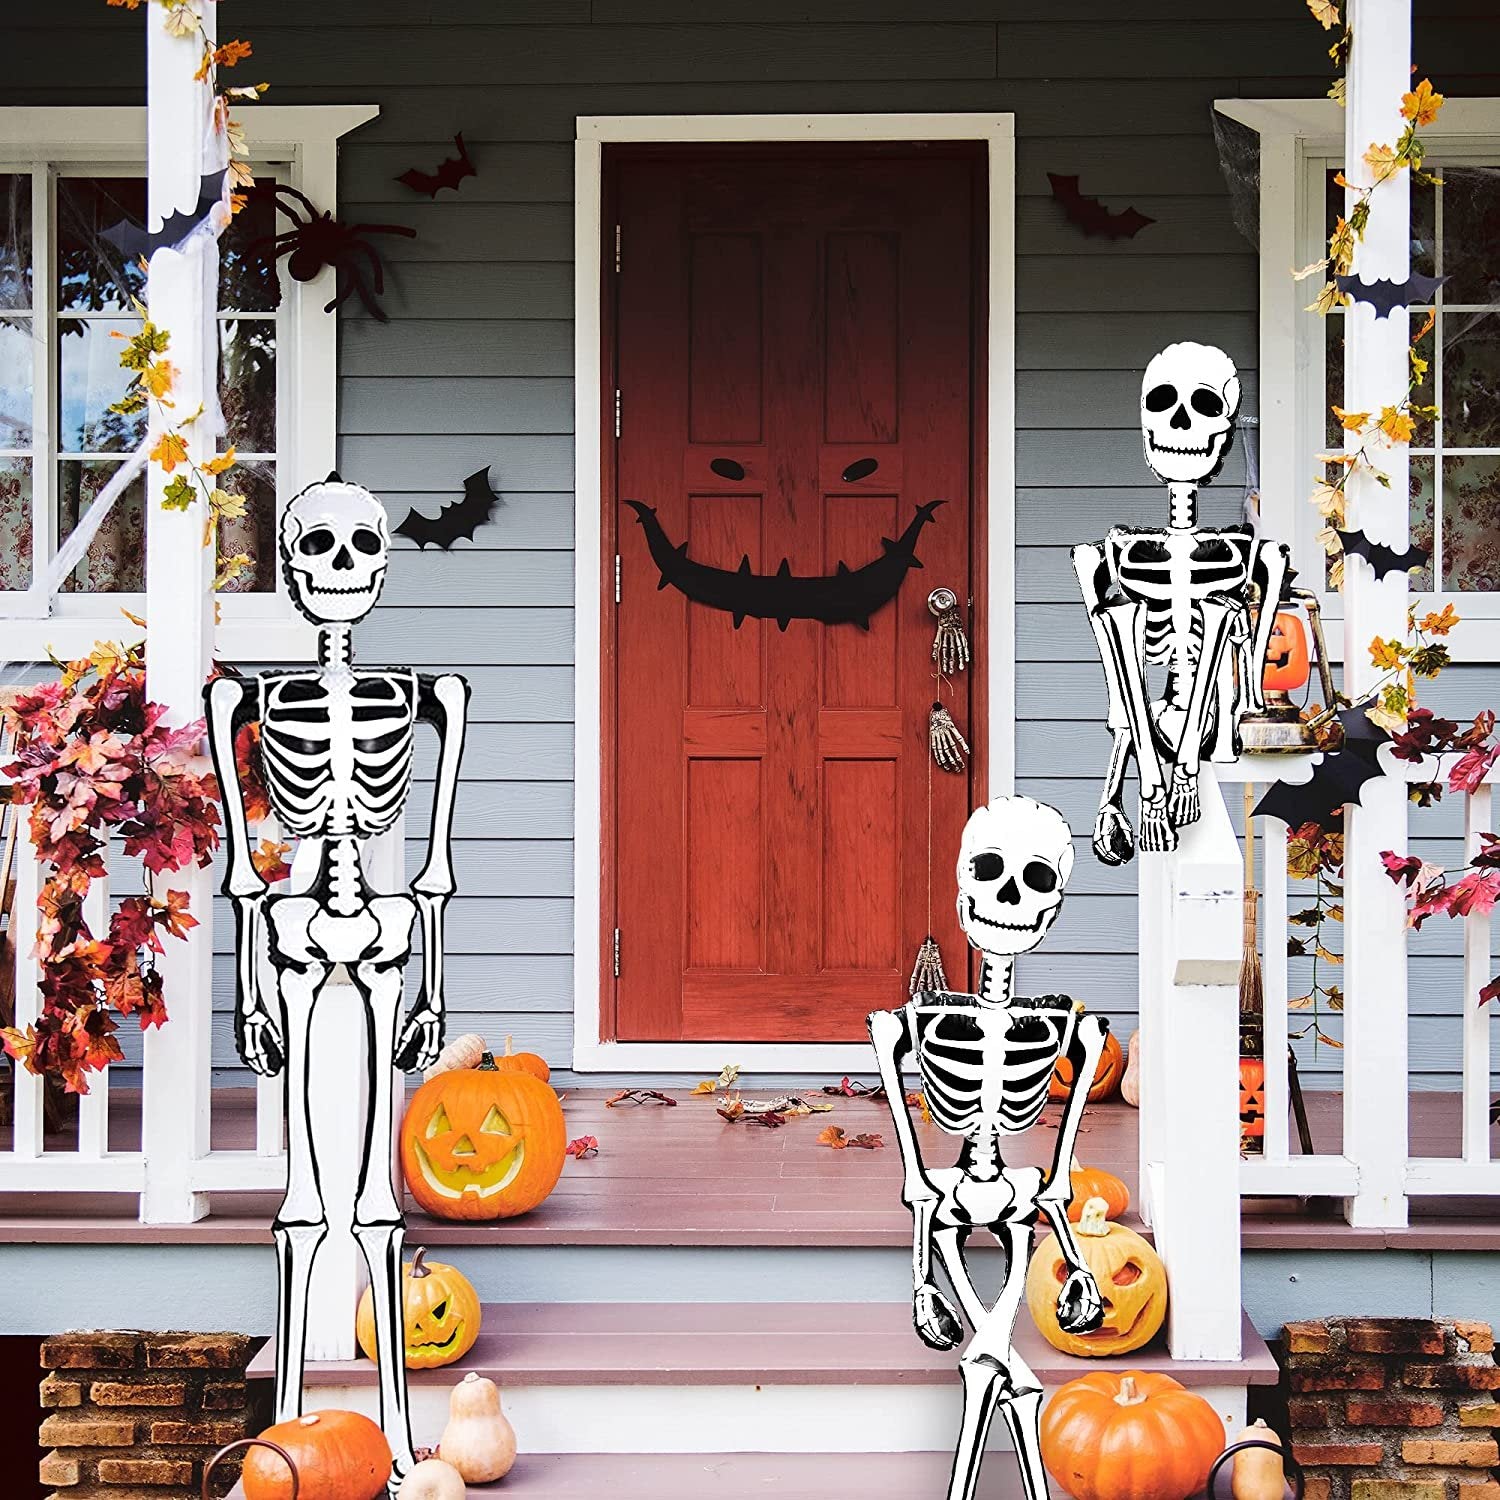 ArtCreativity Halloween Skeleton Inflate Decoration - 6ft Tall - Cute and Creepy Home Decor - for Indoor and Outdoor Use - Halloween Party Supplies, Contest Prize for Kids